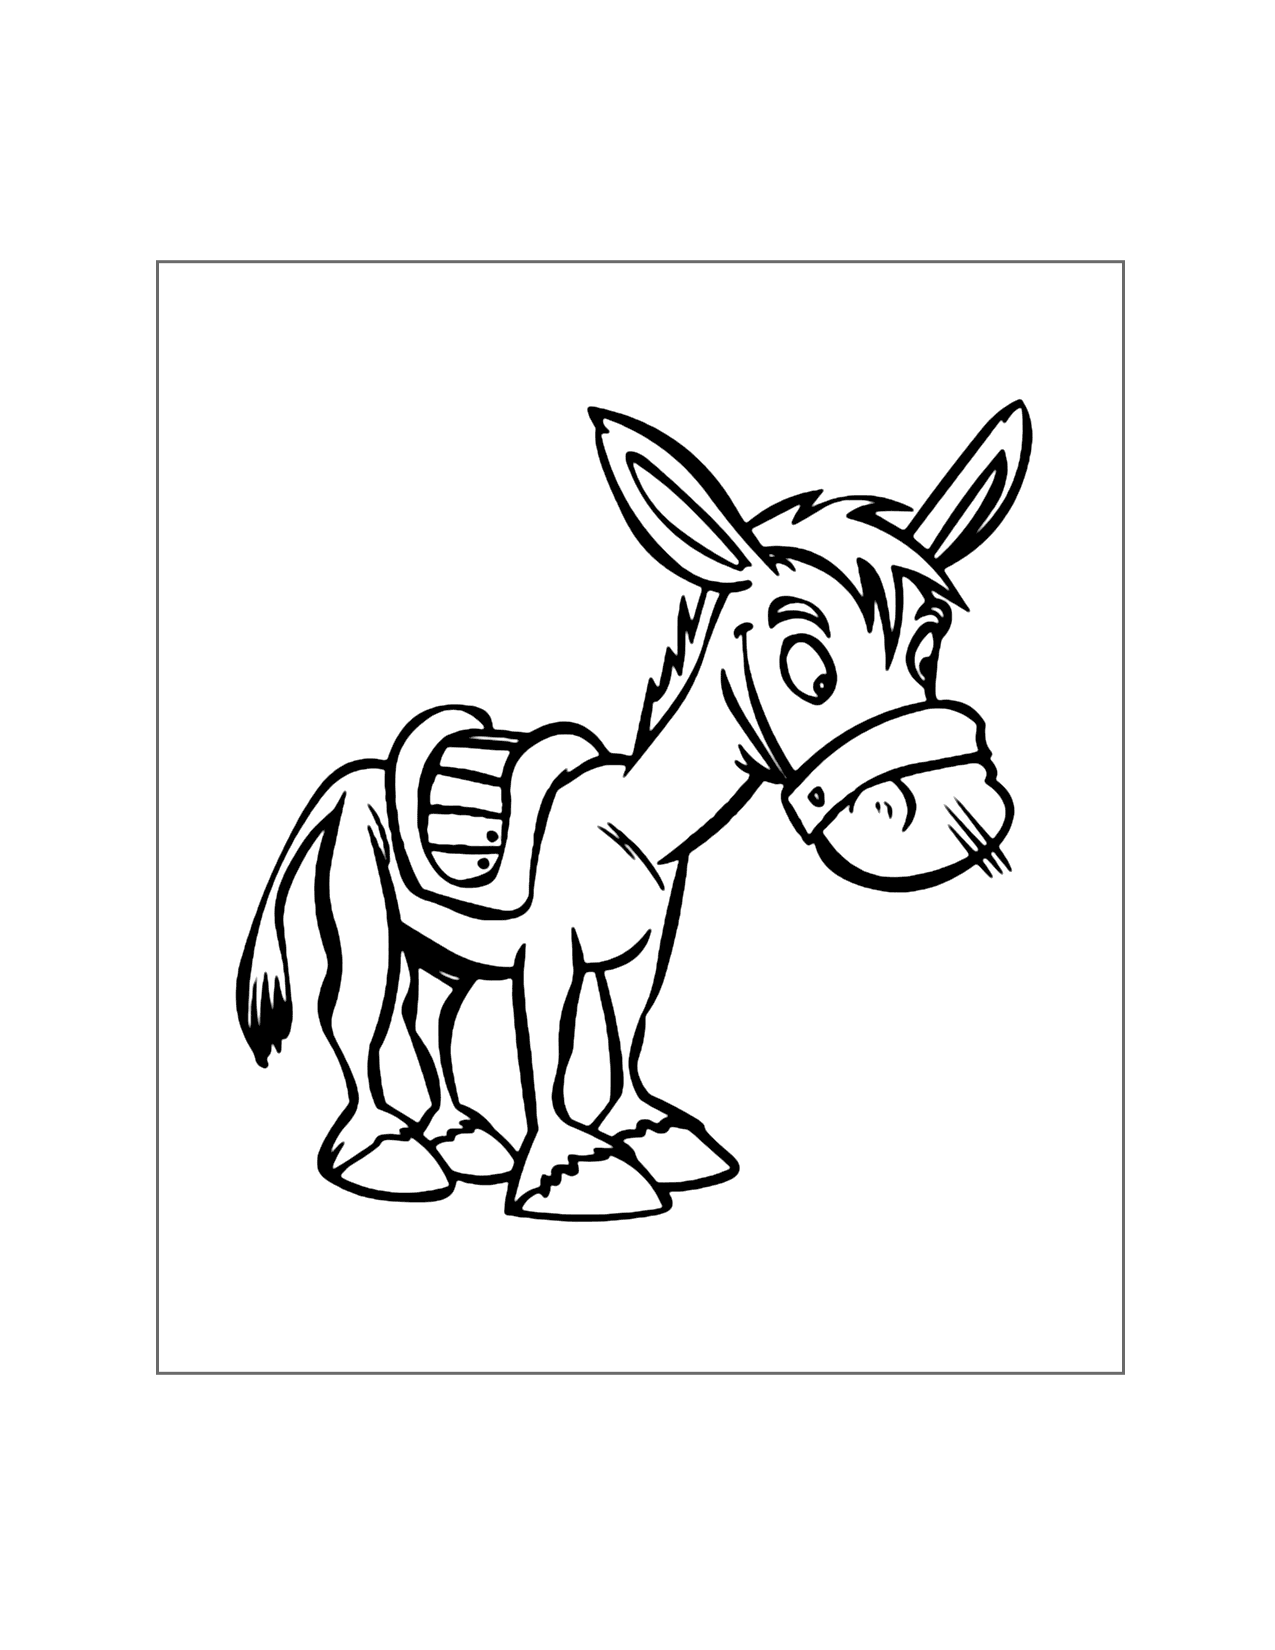 Cute Donkey Coloring Page